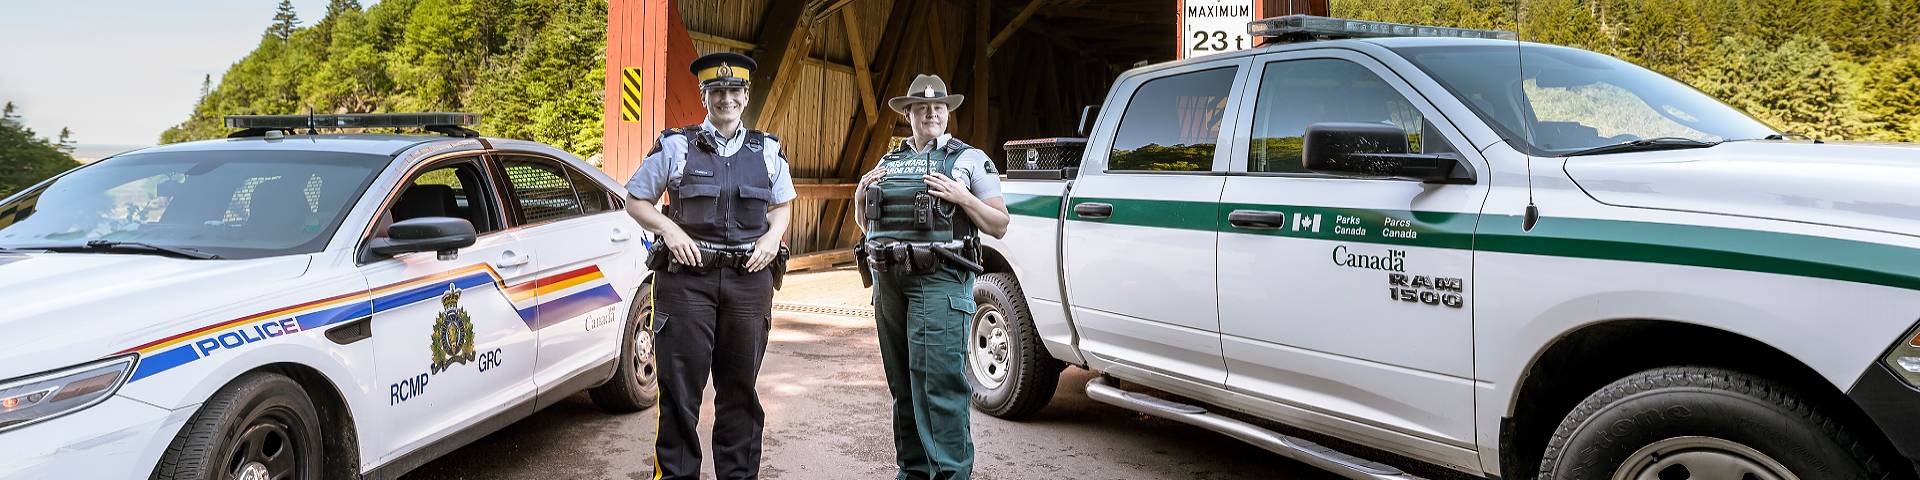 A park warden and an RCMP officer standing next to their vehicles